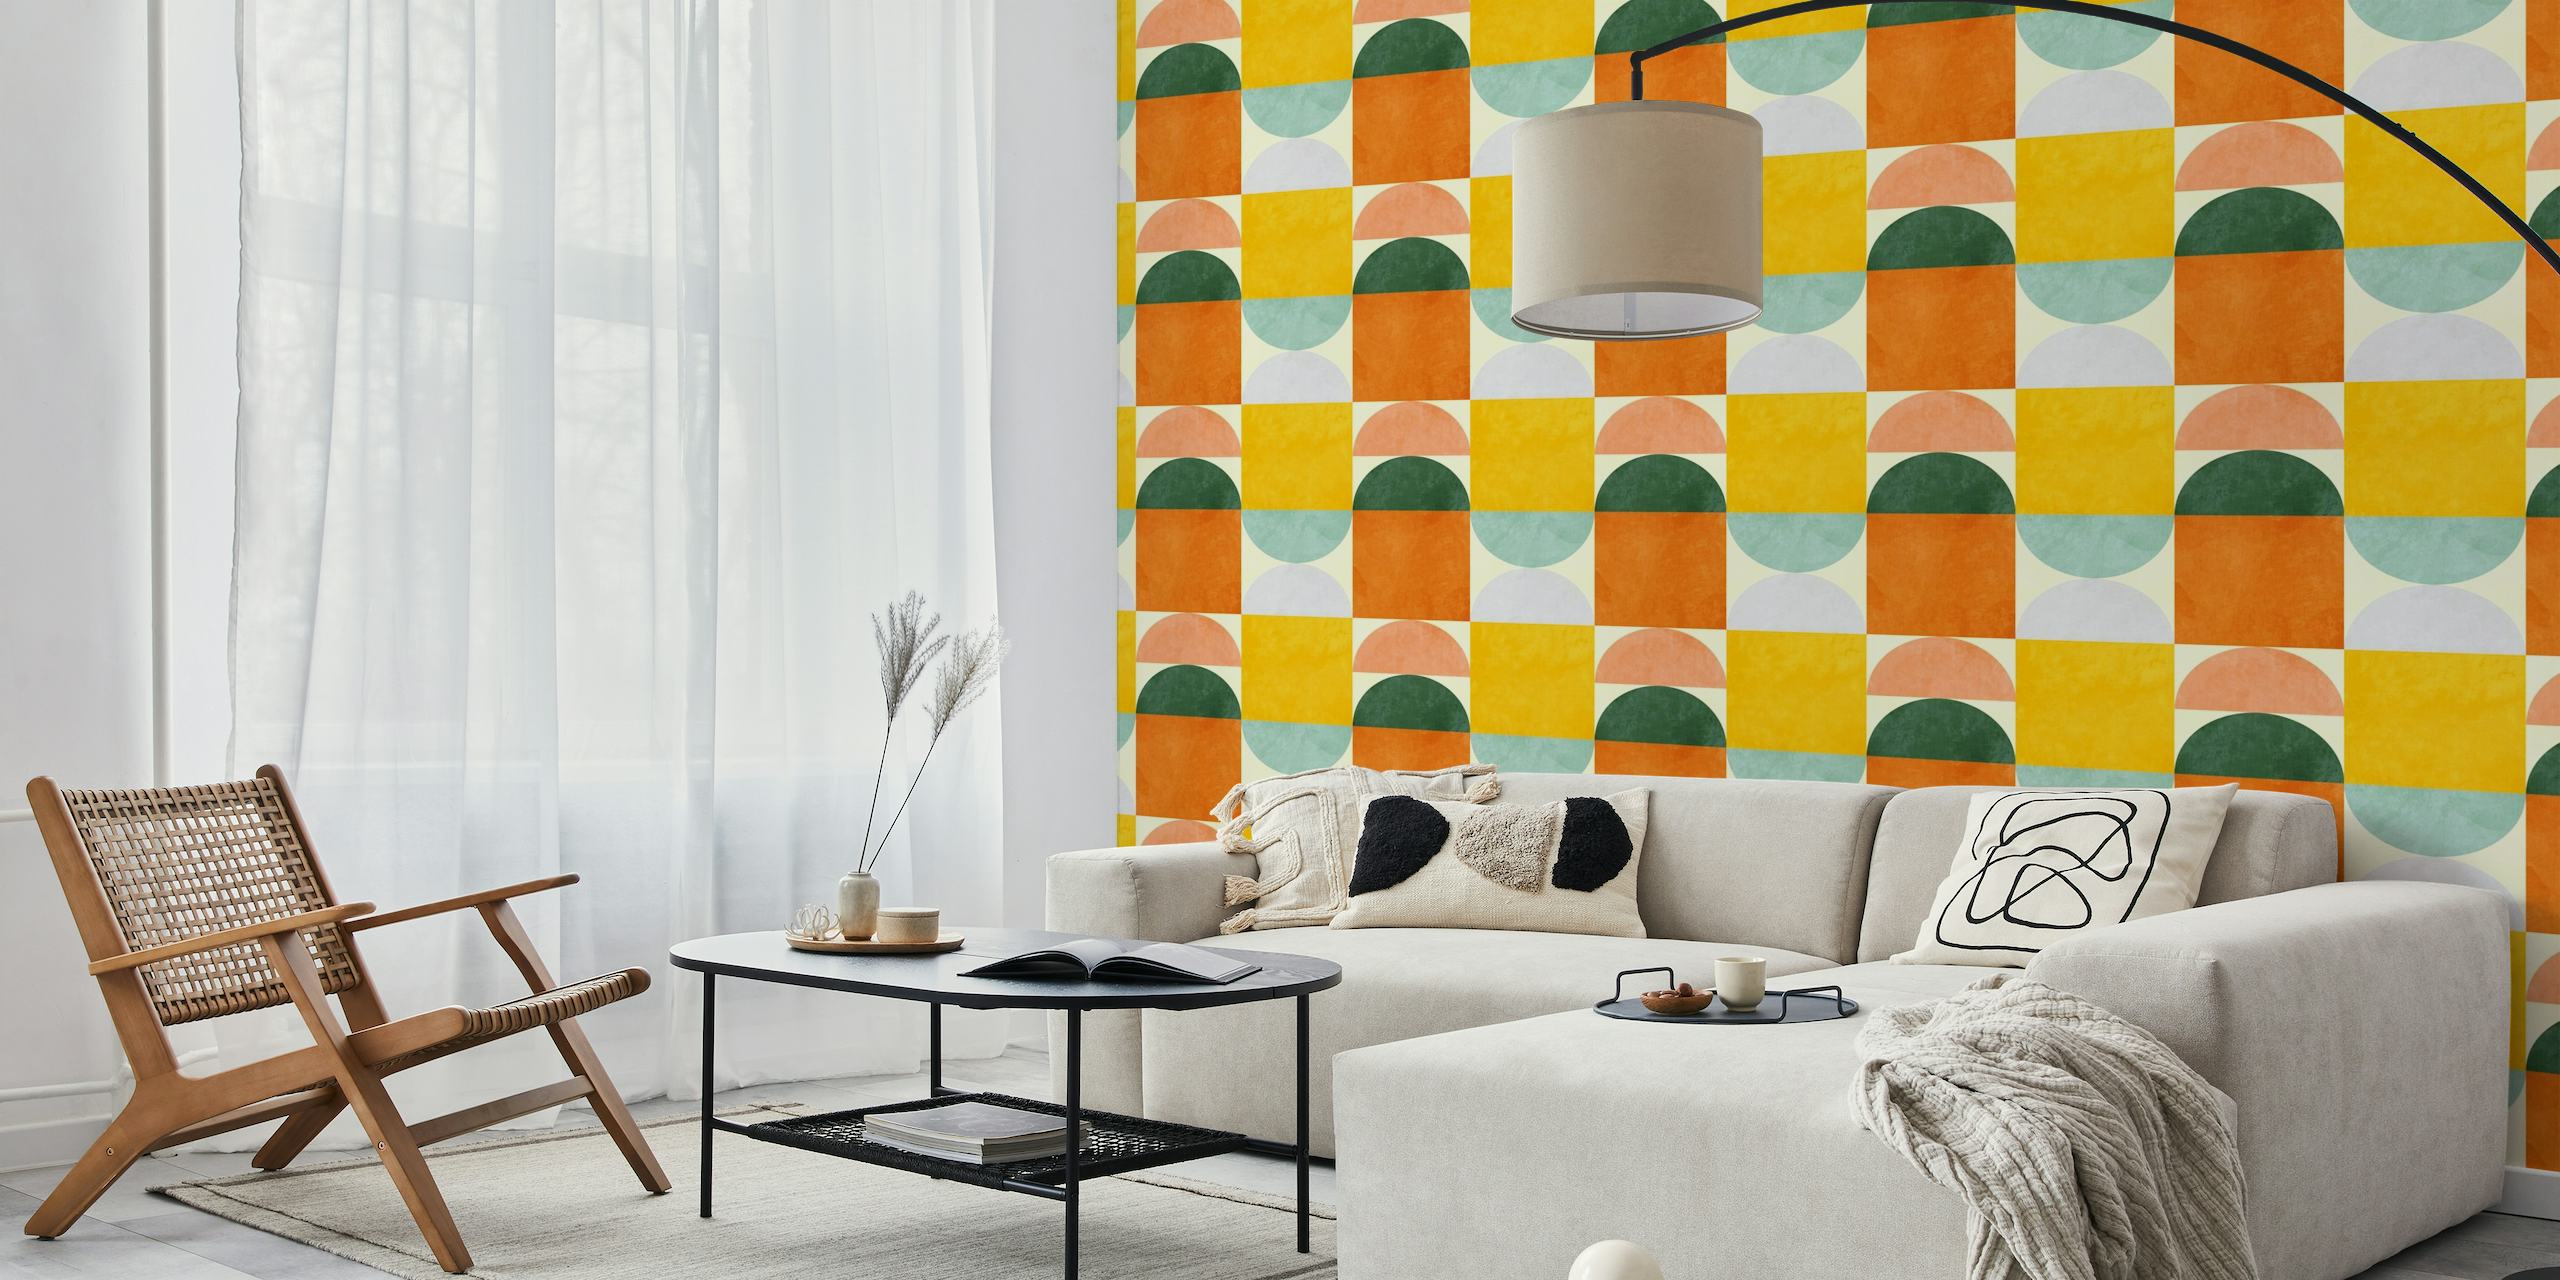 Colorful checkers wall mural with mid century modern style hues